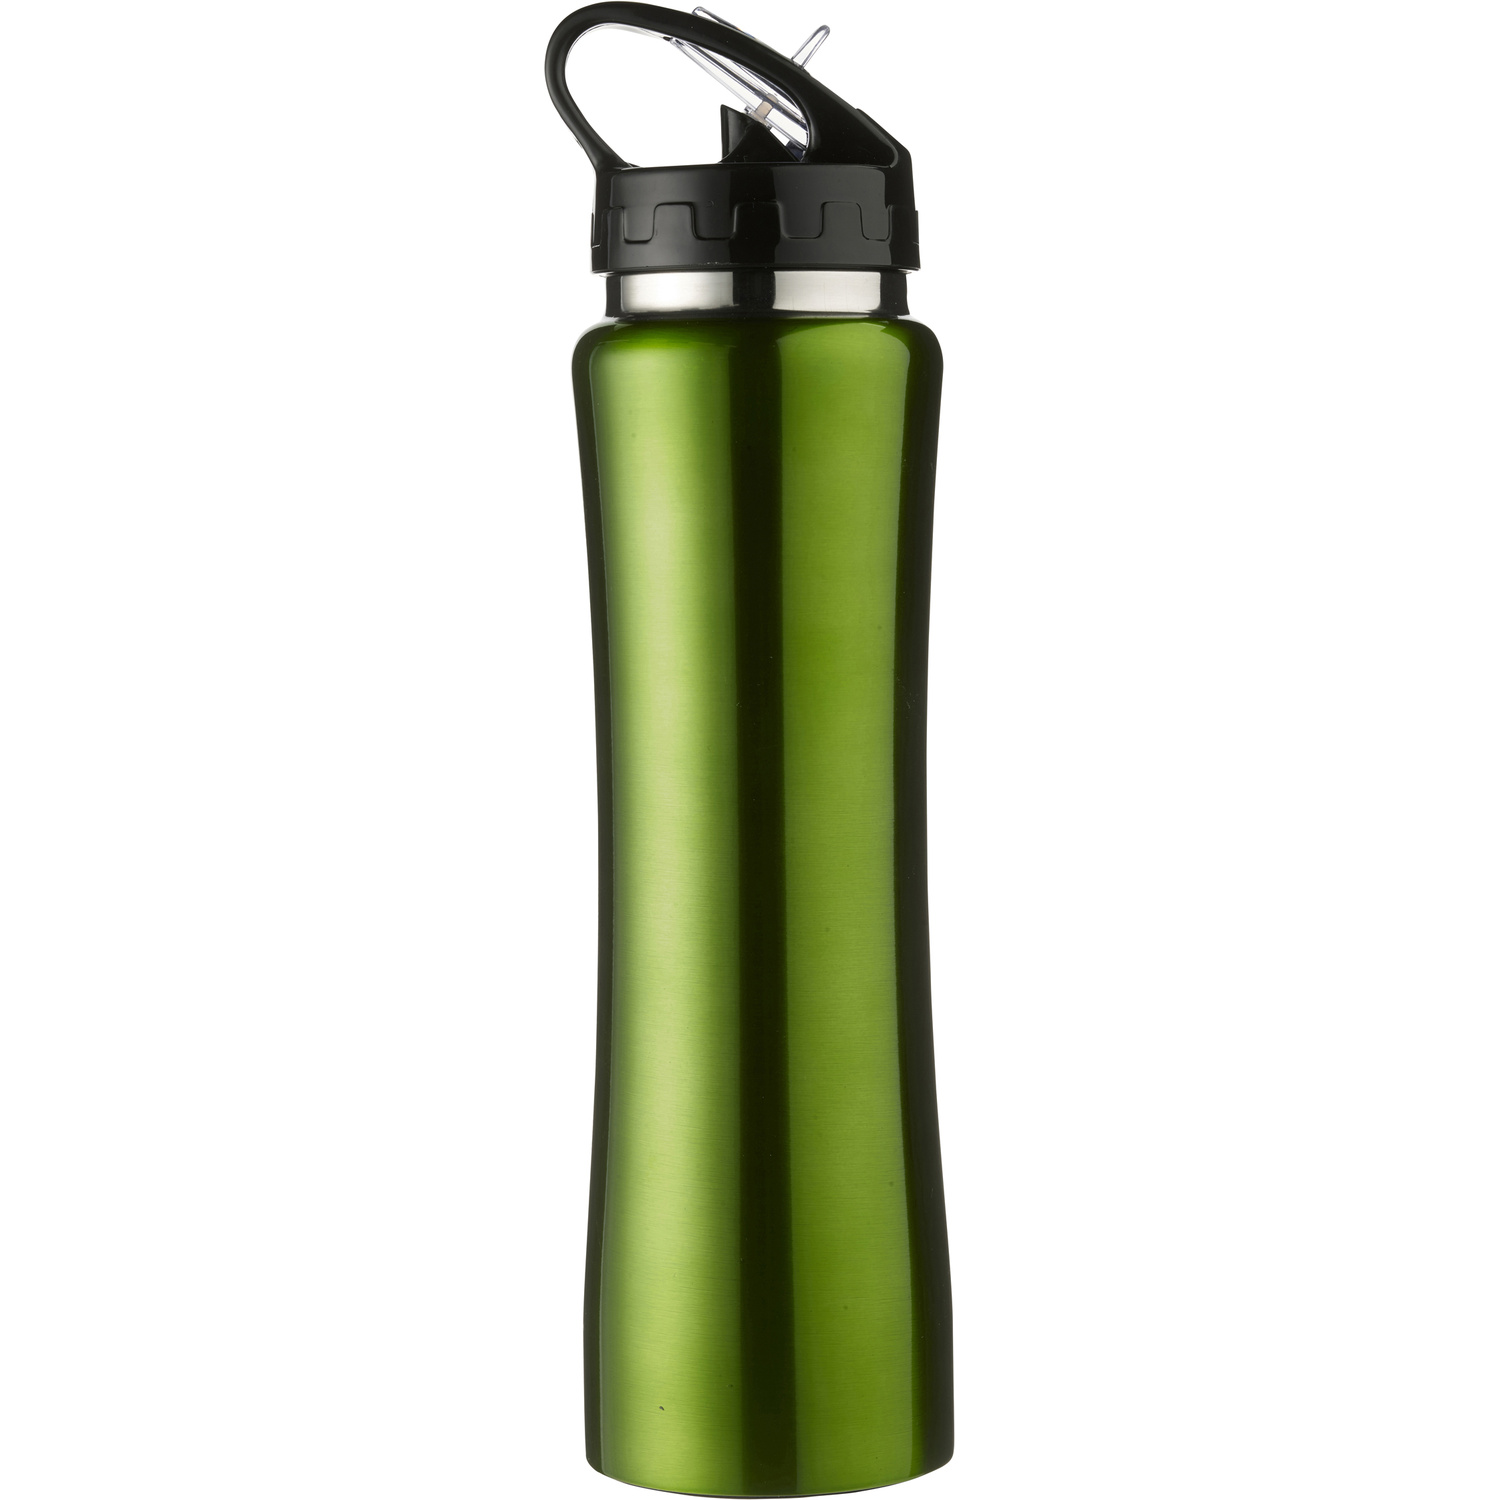 006535 029999999 2d090 lft pro01 fal - Stainless steel double walled flask (500ml)